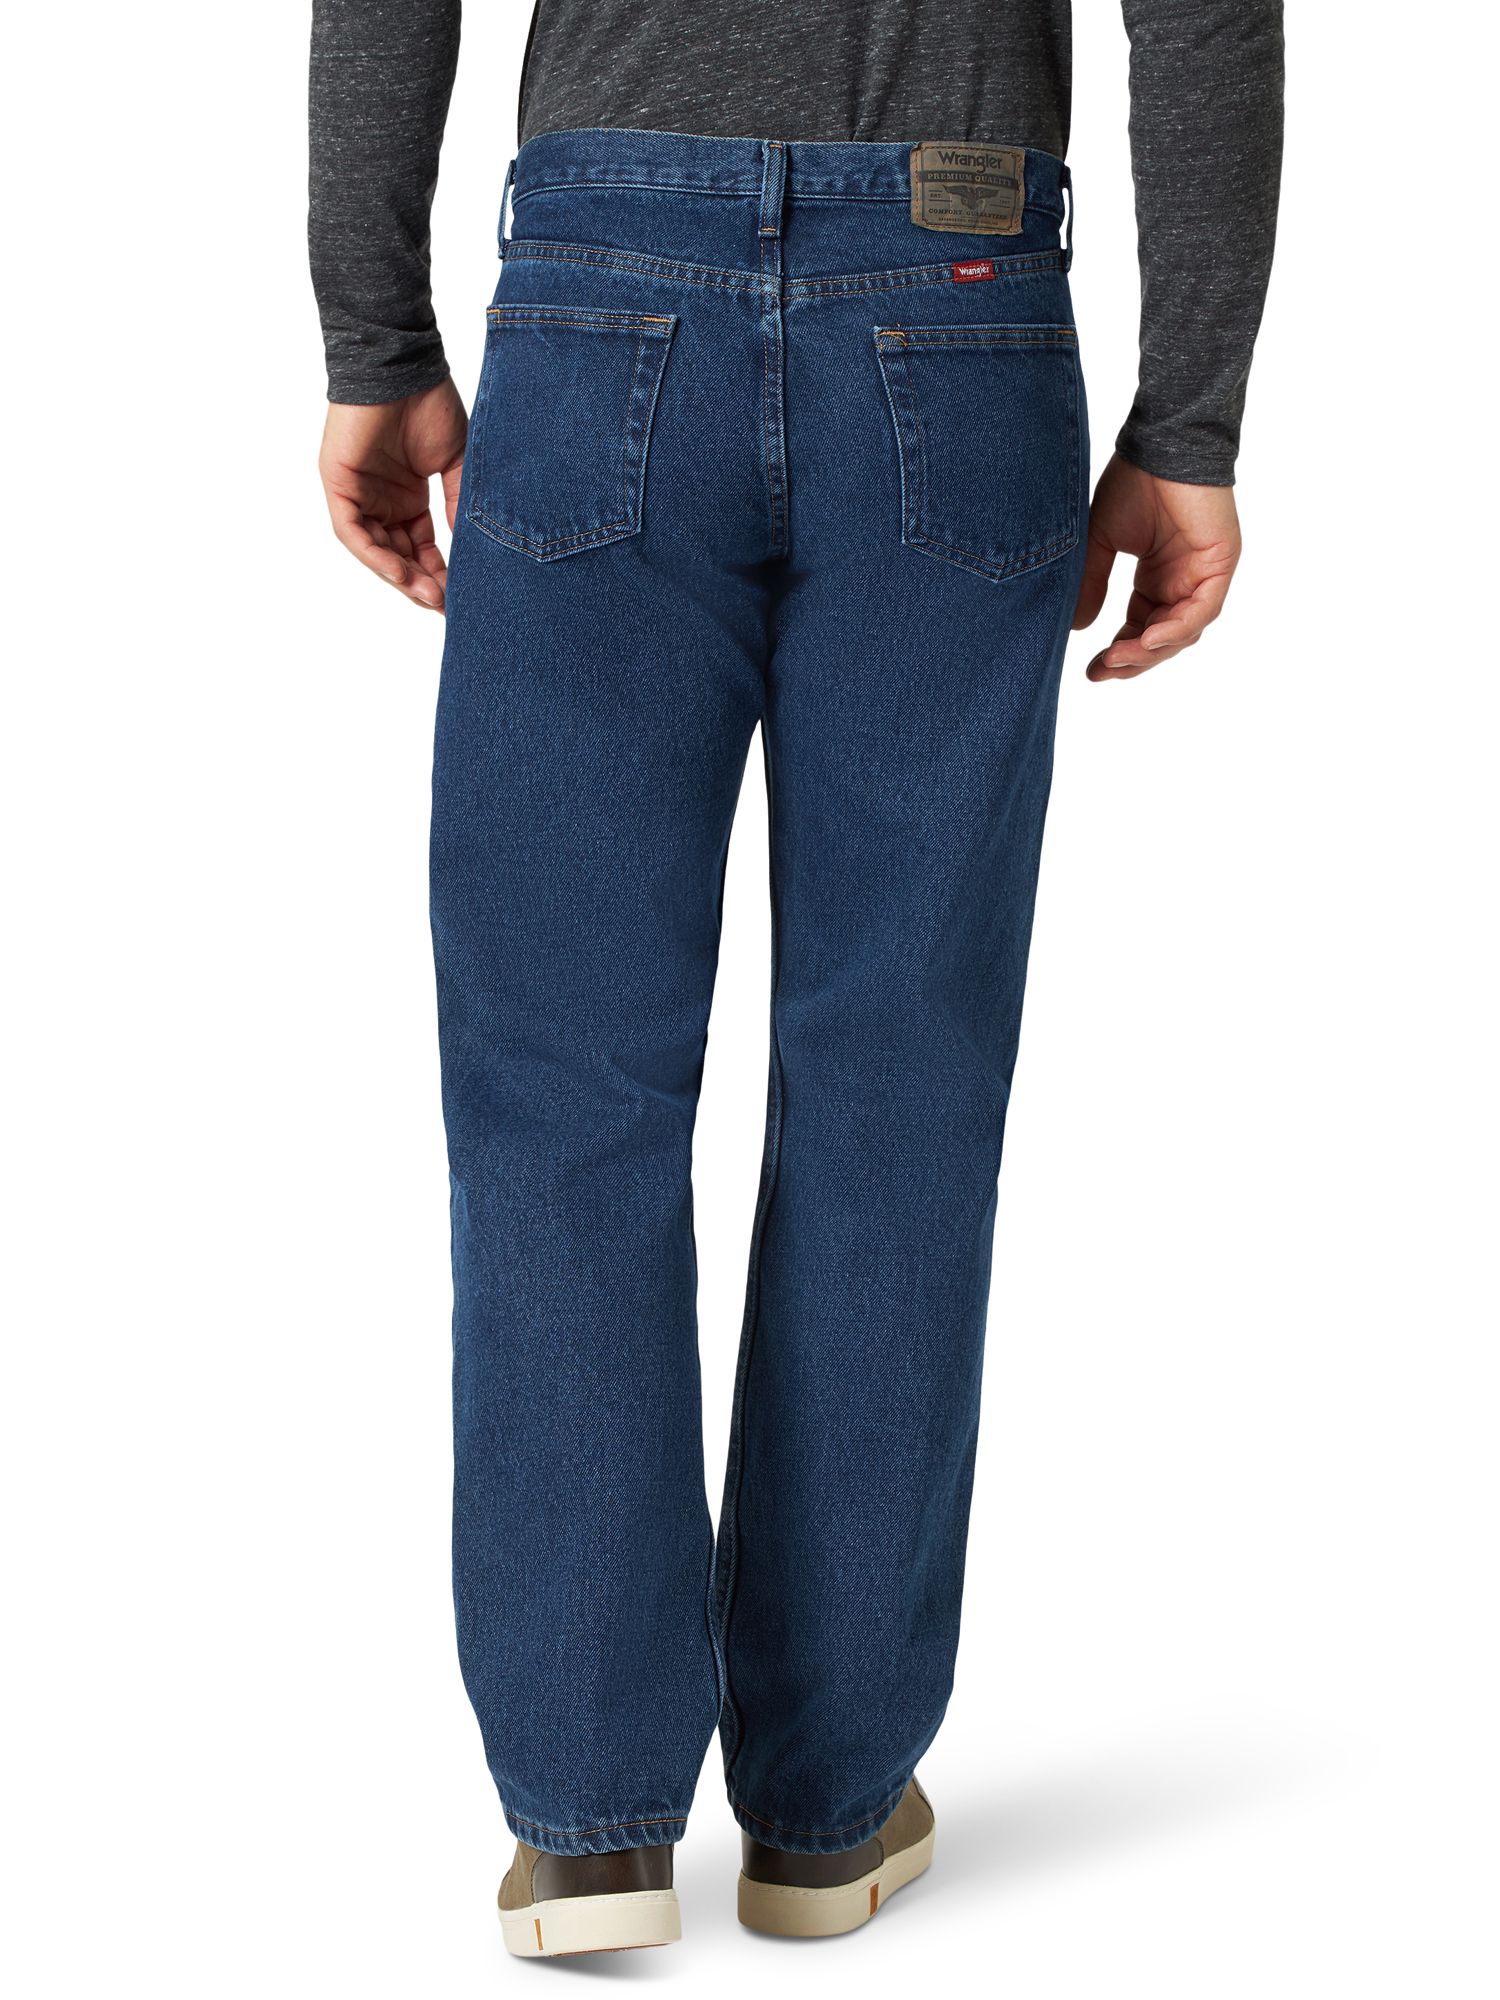 Wrangler Men's and Big Men's Relaxed Fit Jeans - image 3 of 4